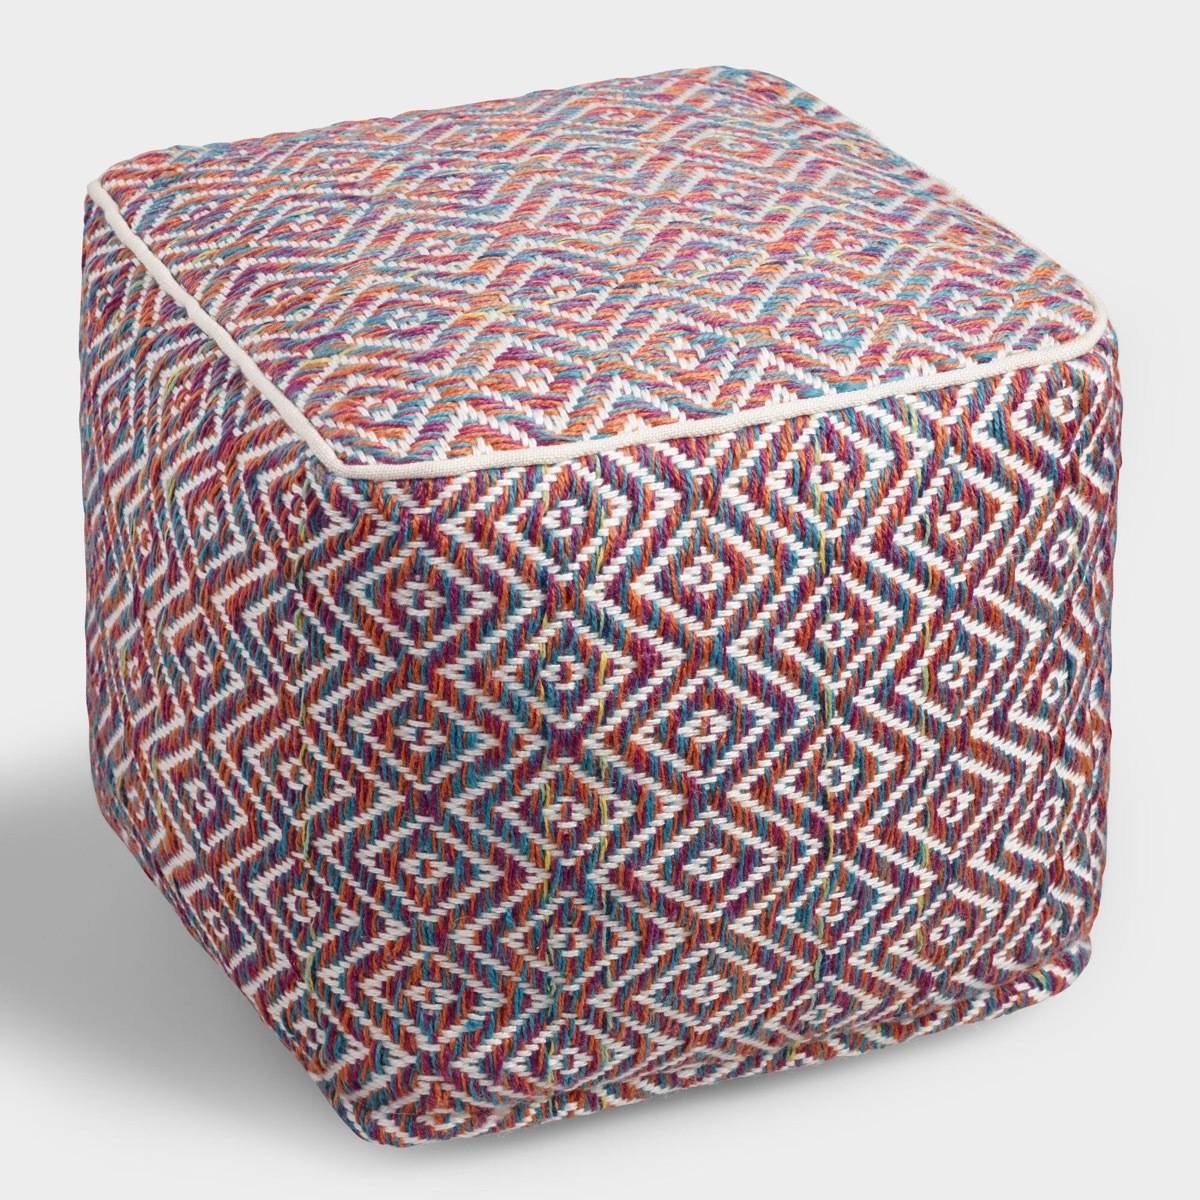 Multicolor knit pouf from Cost Plus World Market